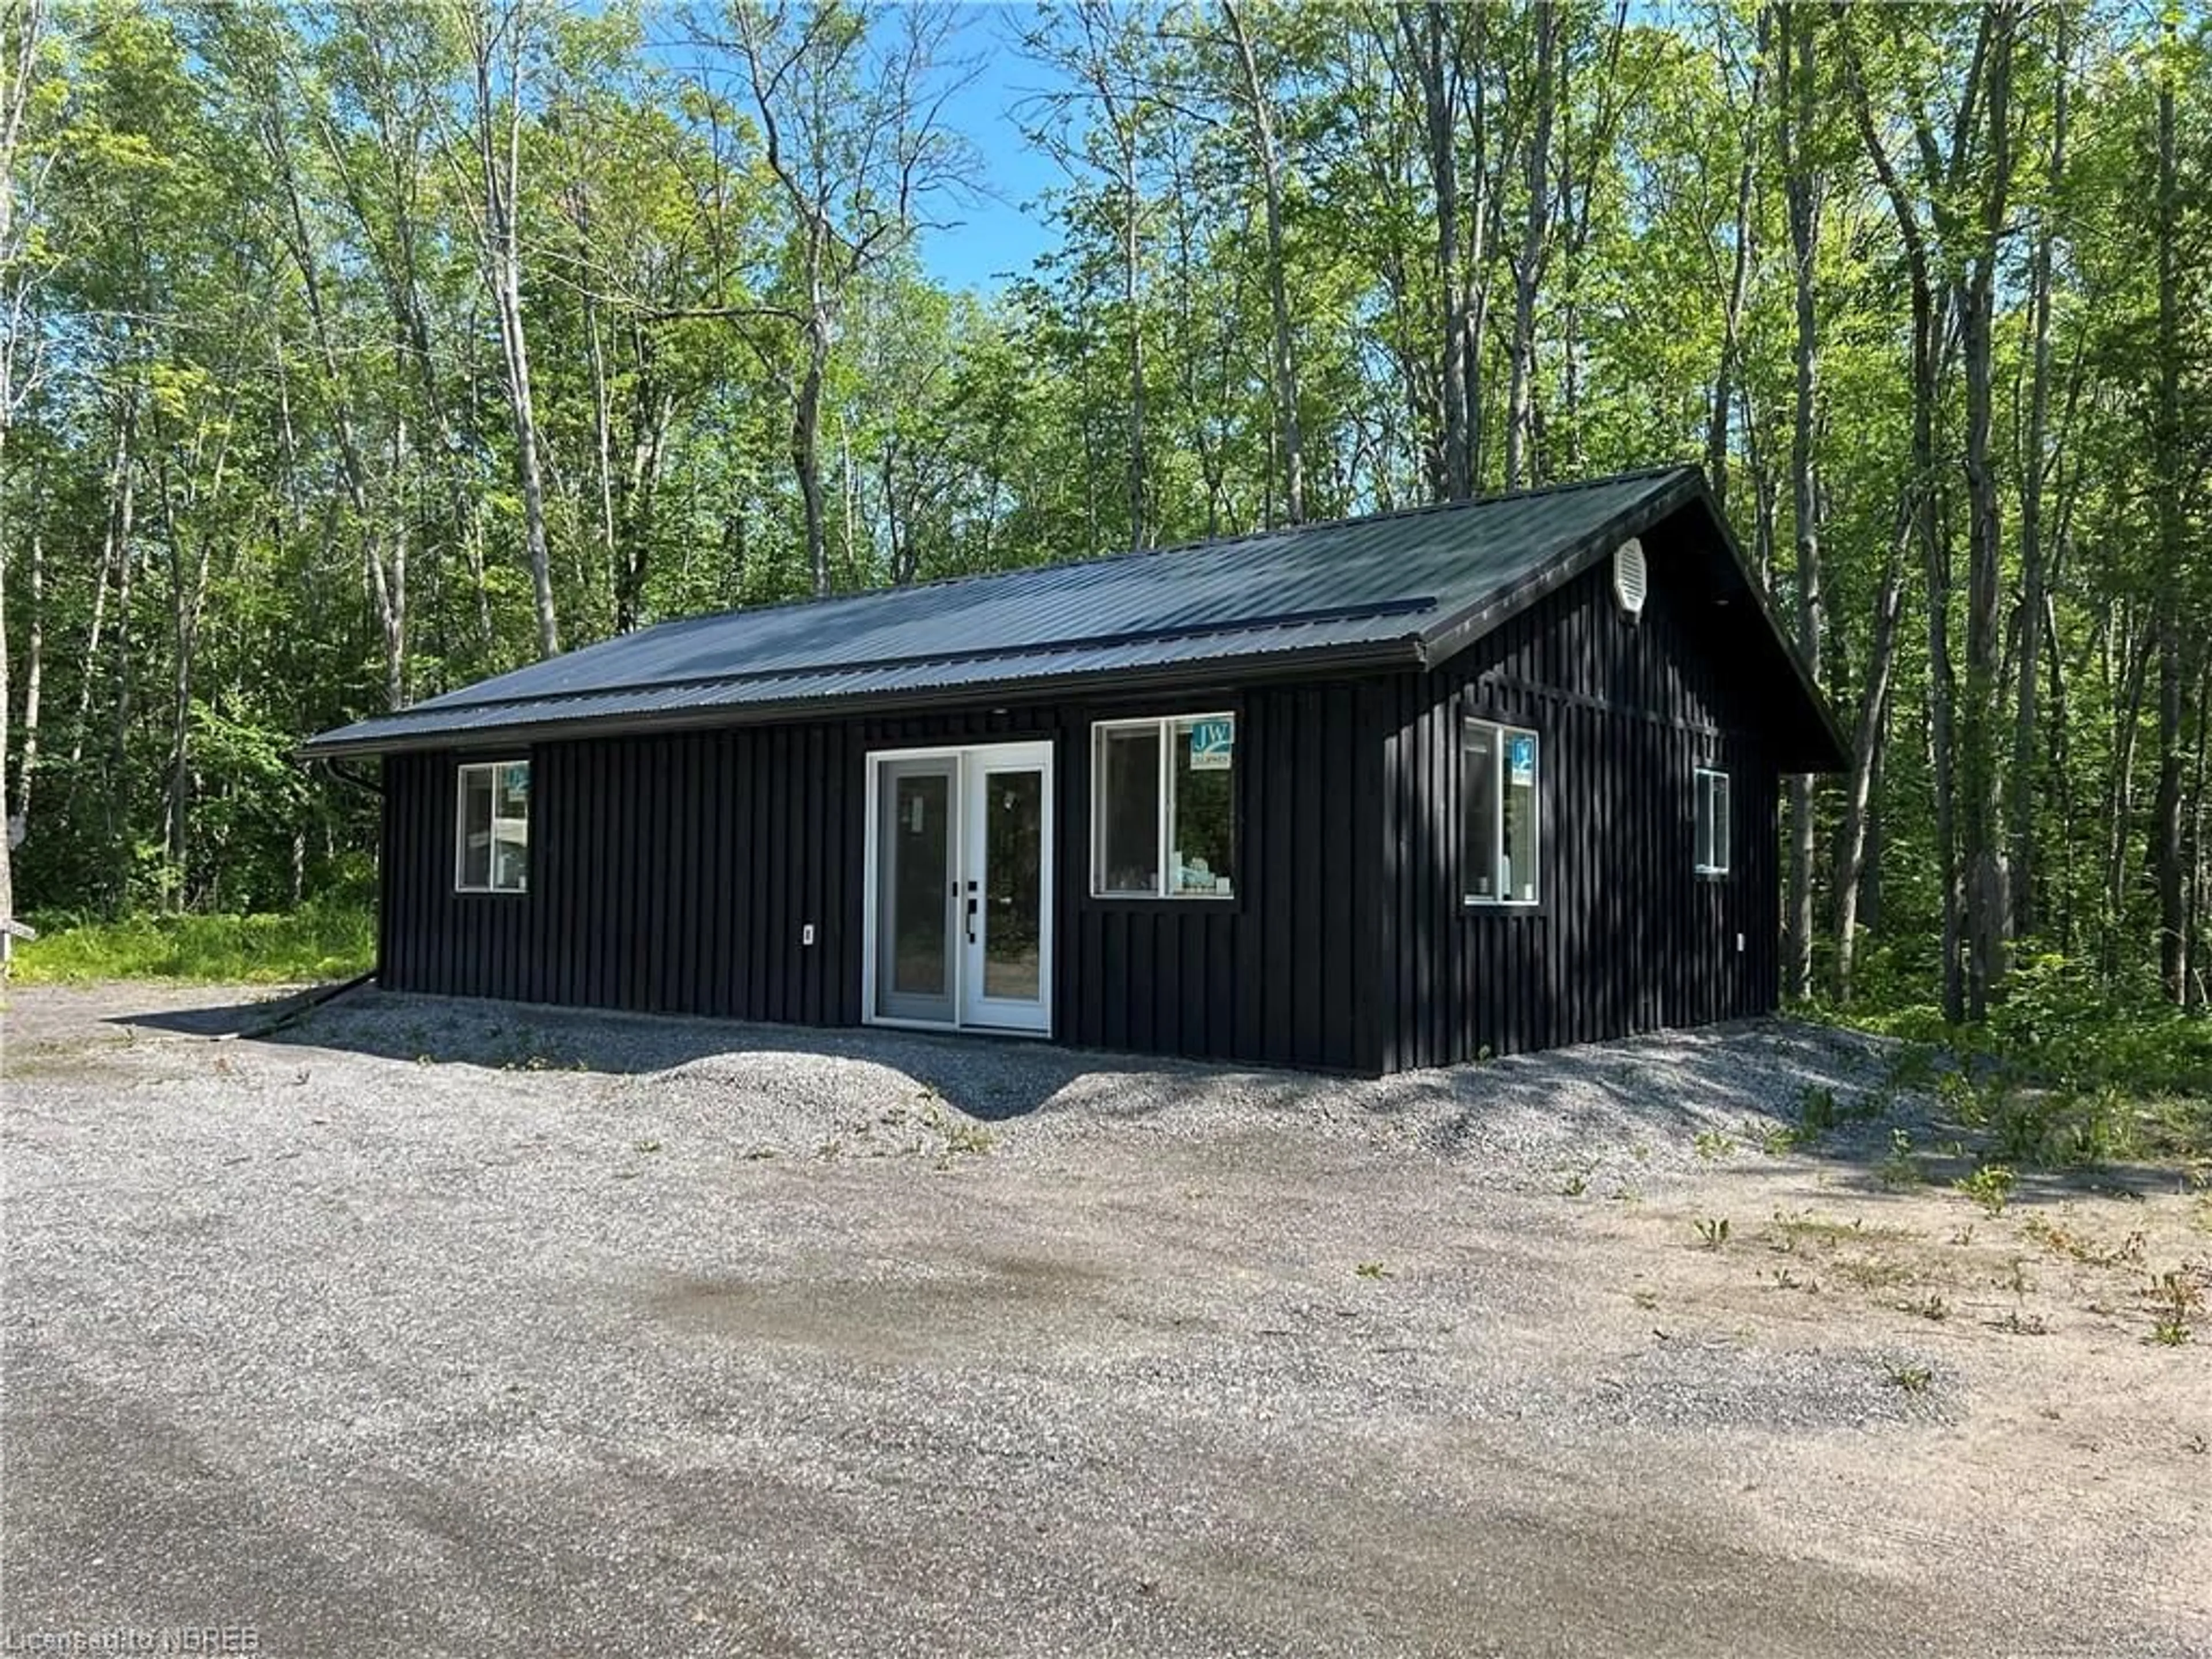 Cottage for 1416 Jocko Point Rd, North Bay Ontario P1B 8G5